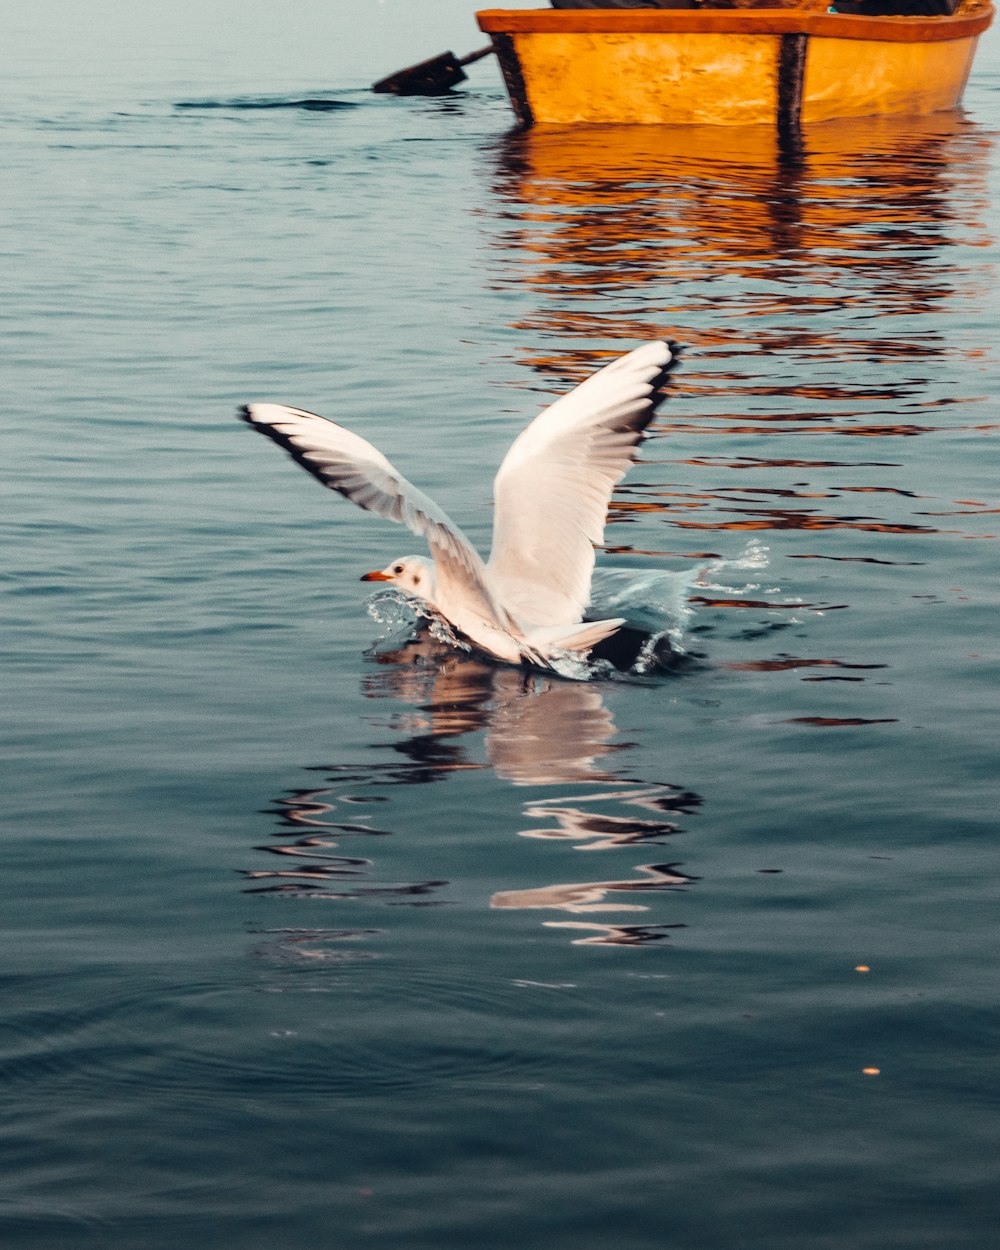 a seagull flying over a body of water with a boat in the background